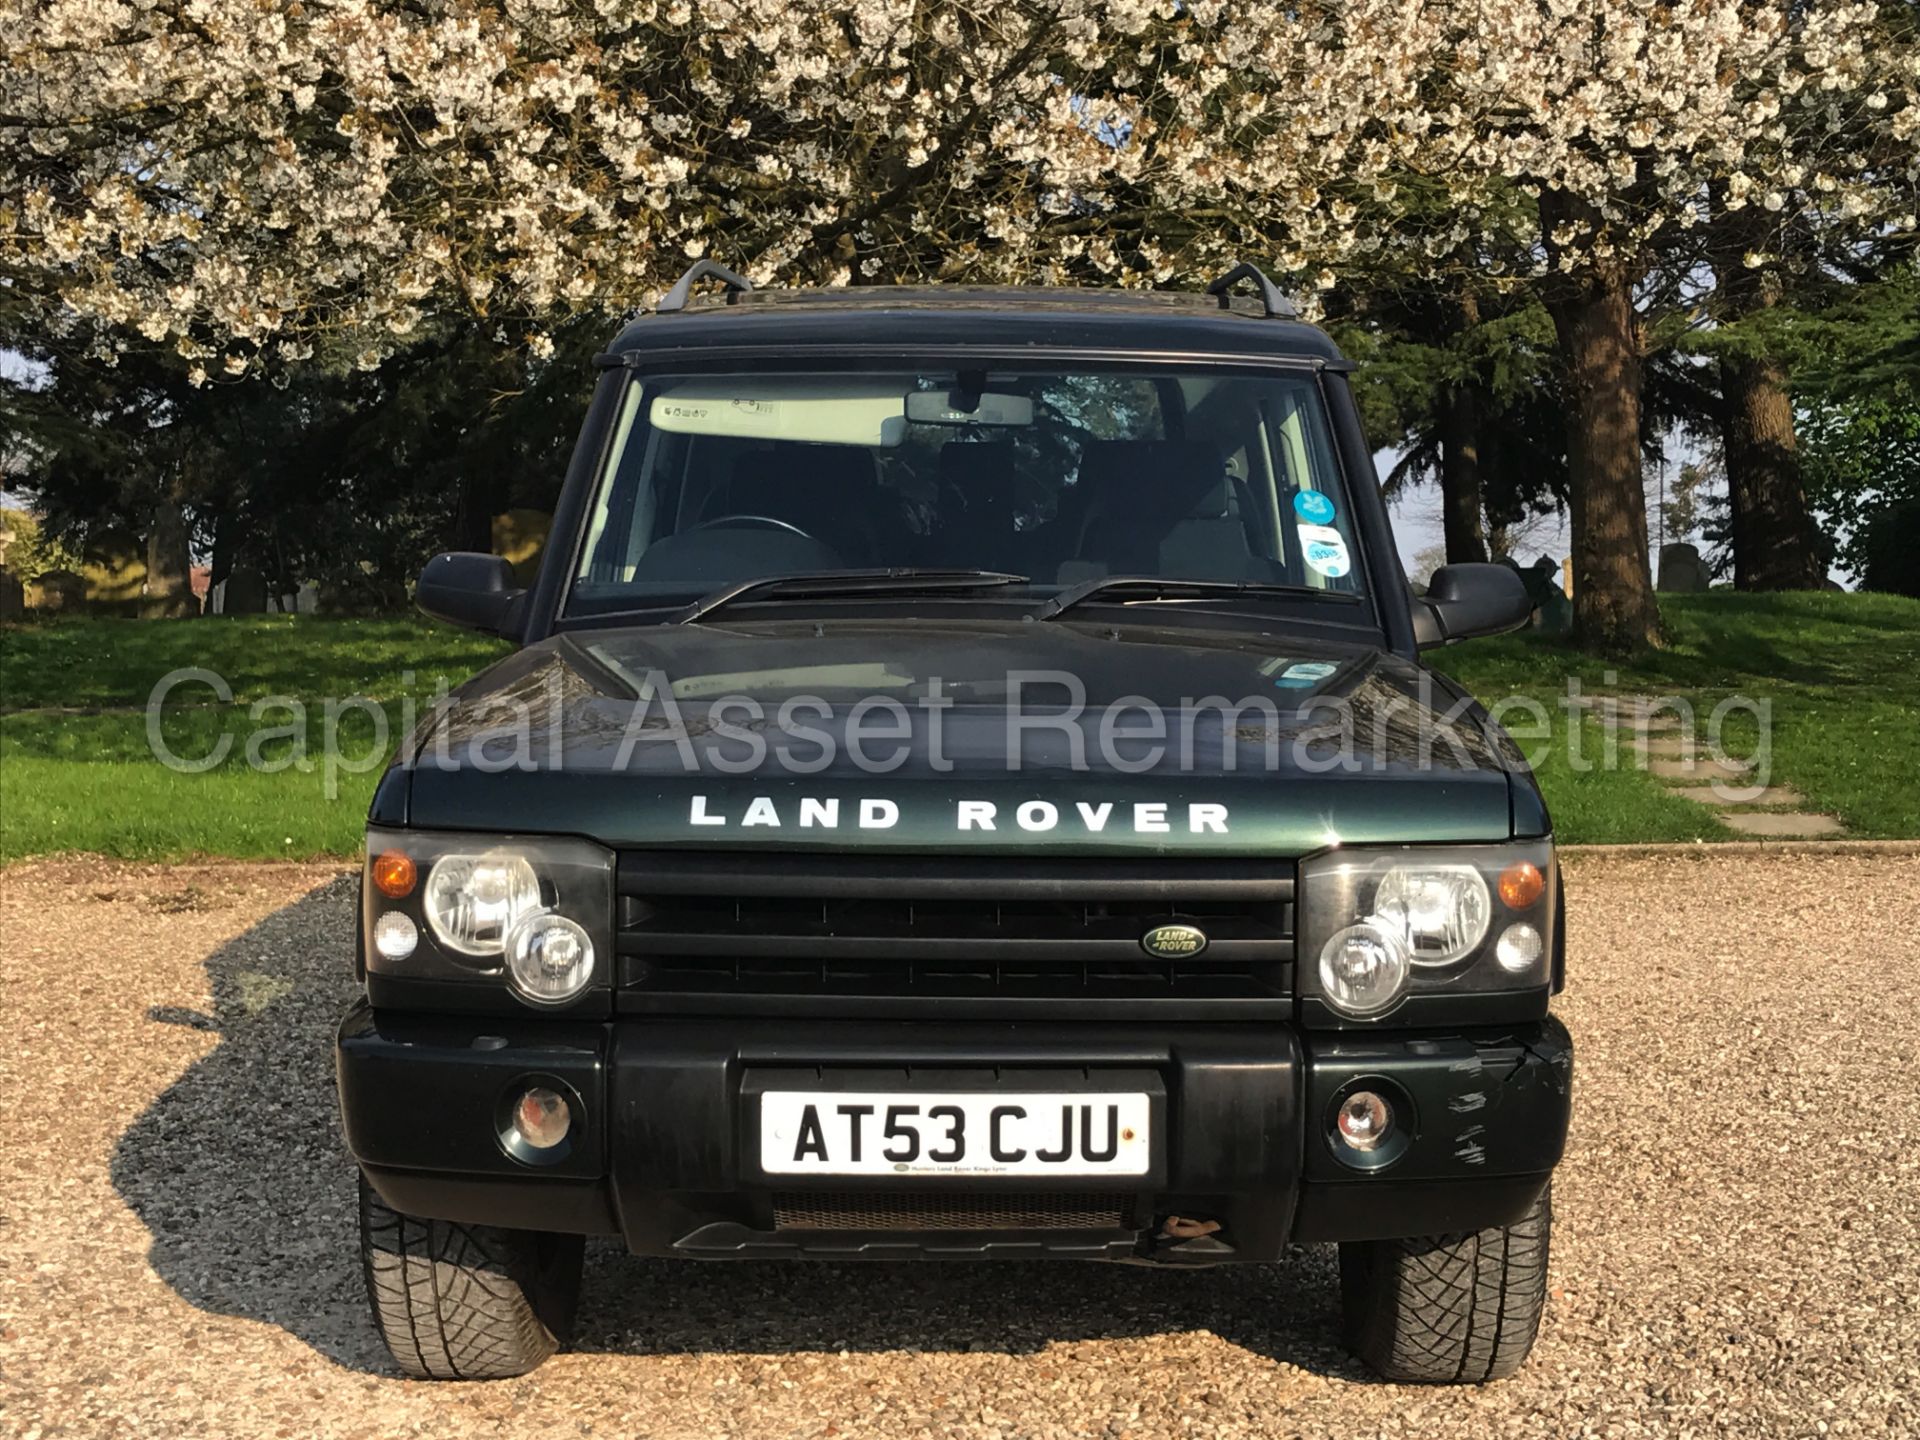 LAND ROVER DISCOVERY TD5 'GS EDITION' (2004 MODEL) 'AUTO - 7 SEATER - AIR CON' (NO VAT - SAVE 20%) - Image 3 of 24